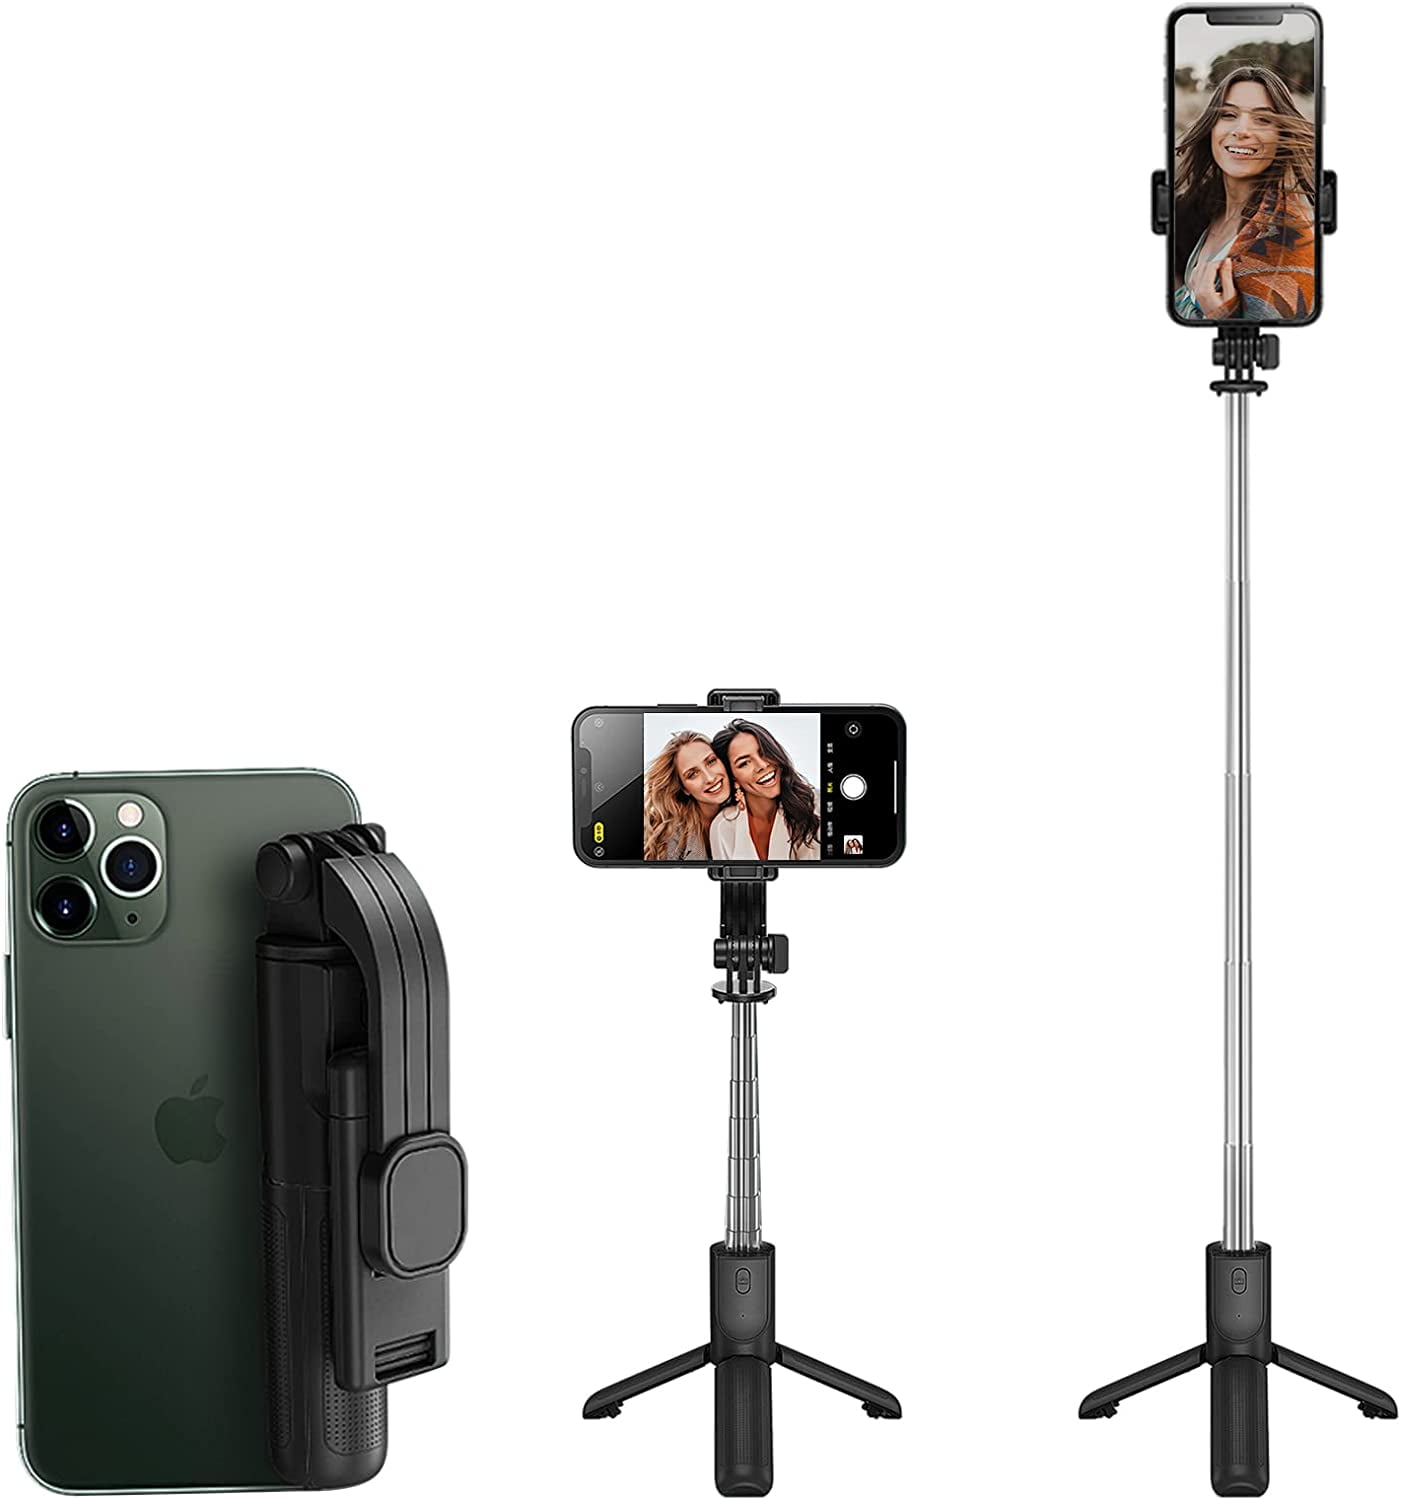 Afname gevogelte onderwijzen MATEPROX Selfie Stick Tripod with Remote, 3 in 1 Extendable Portable  Foldable Cell Phone Holder Stand for iPhone Samsung LG - Black - Walmart.com